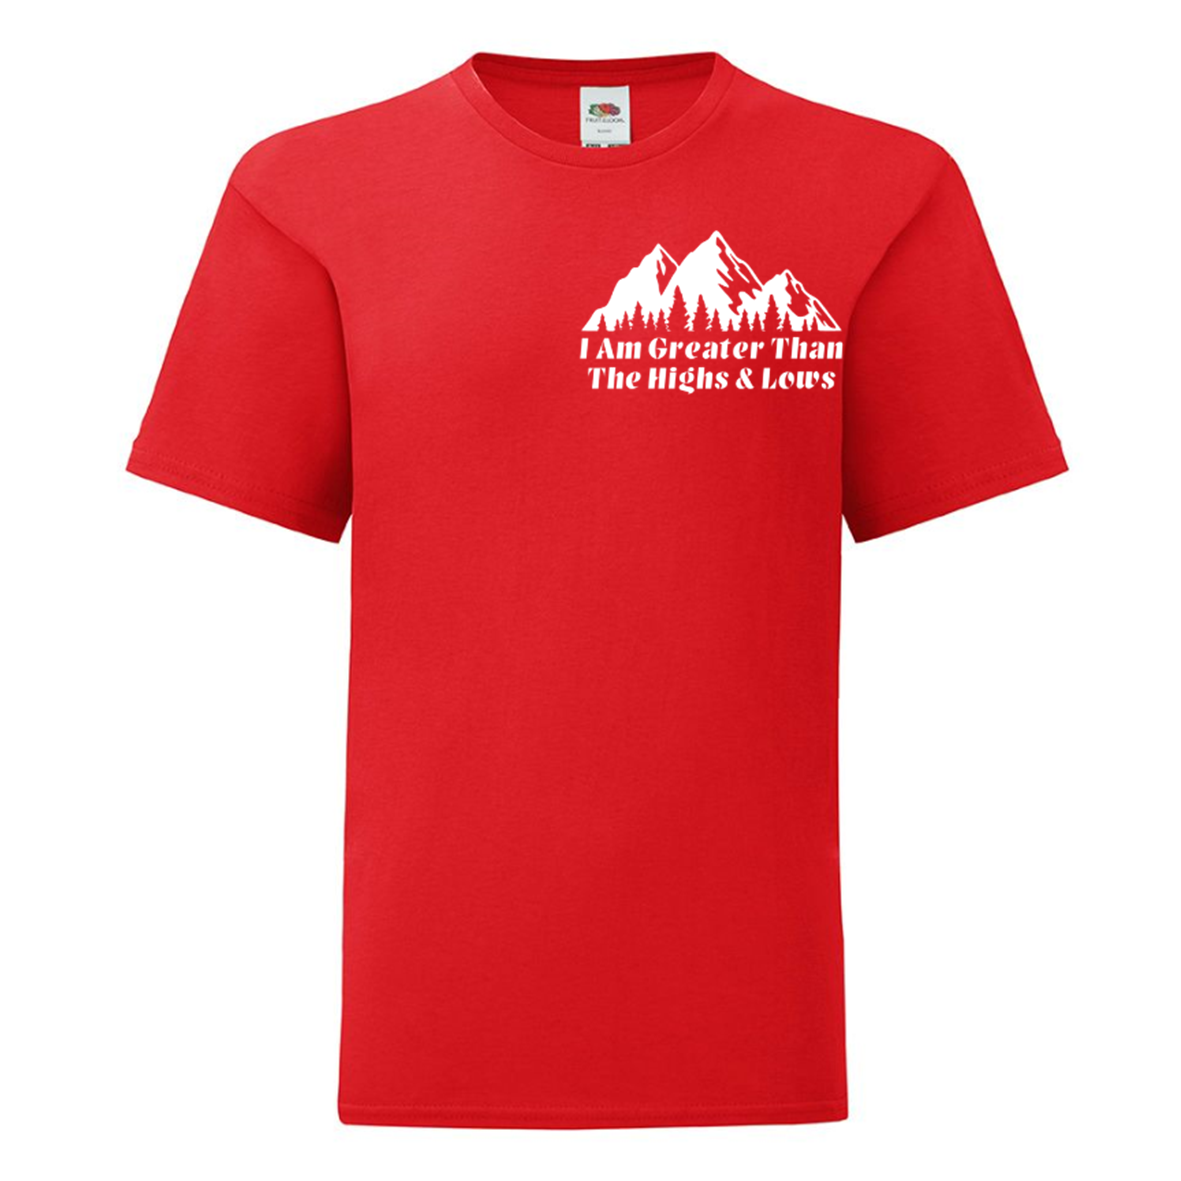 I Am Greater Than The Highs & Lows Kids T Shirt